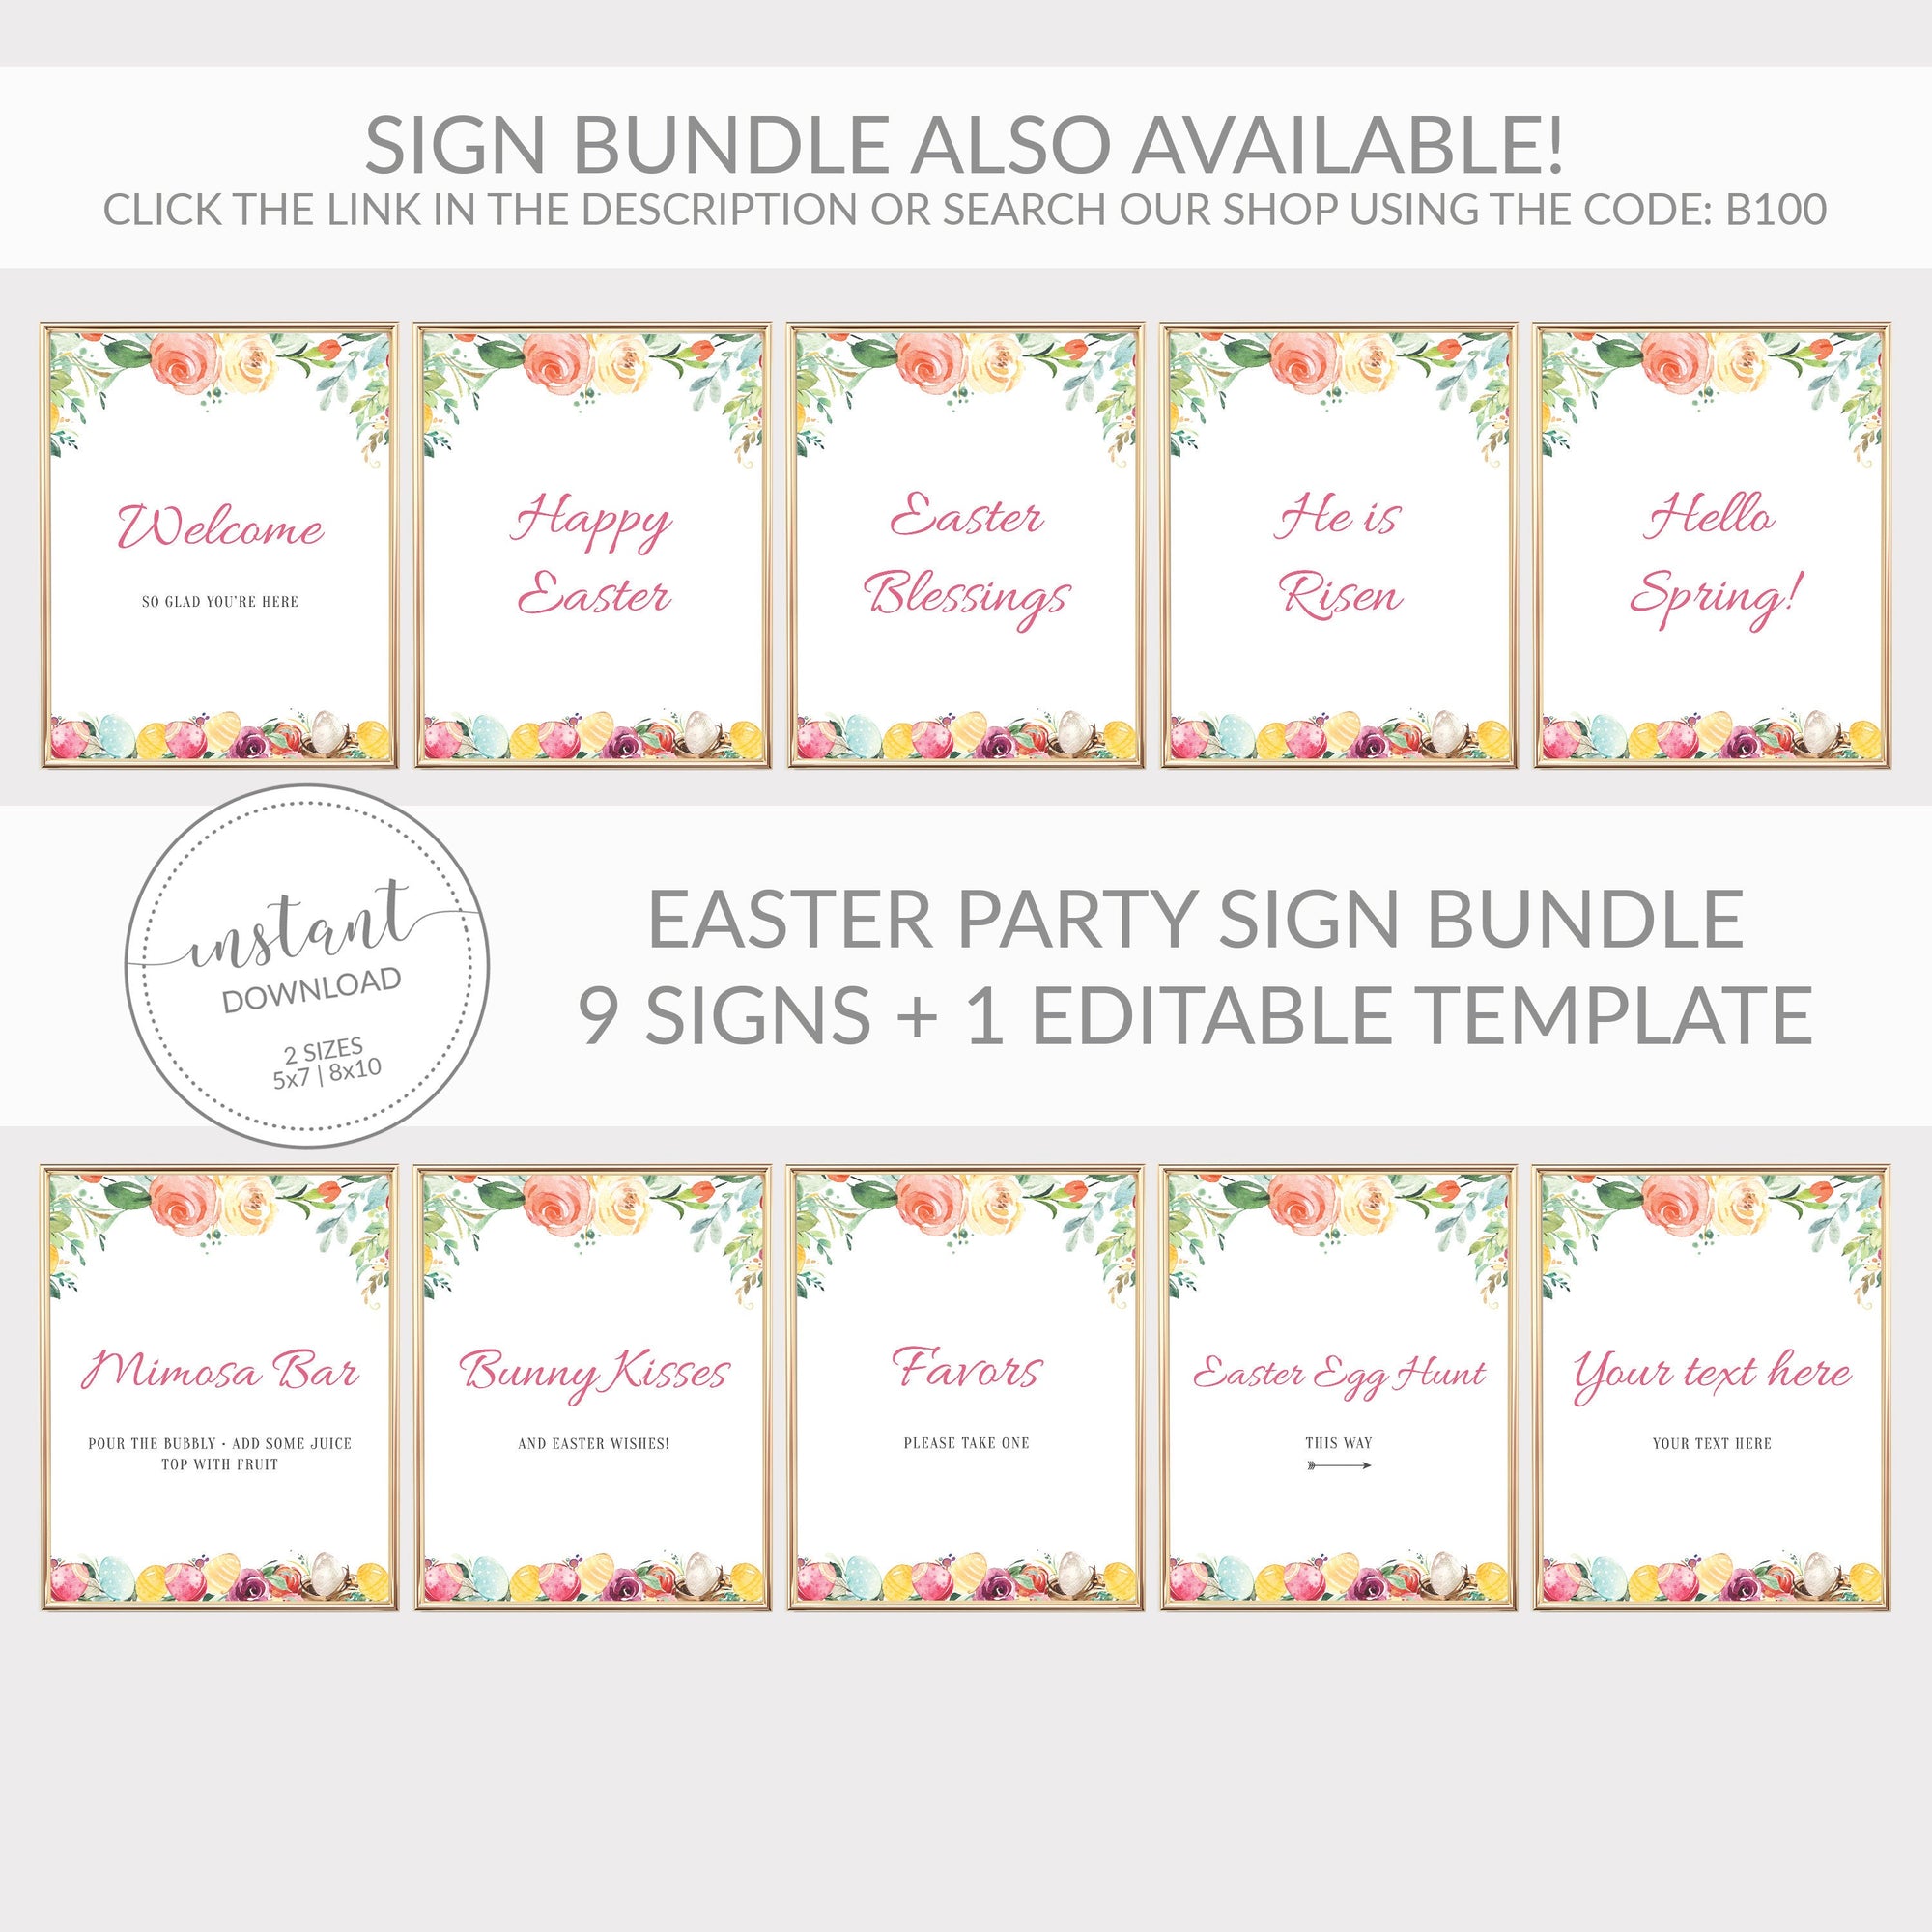 Easter Brunch Mimosa Bar Sign Printable, Printable Easter Decorations, Easter Party Supplies, Easter Decor, DIGITAL DOWNLOAD B100